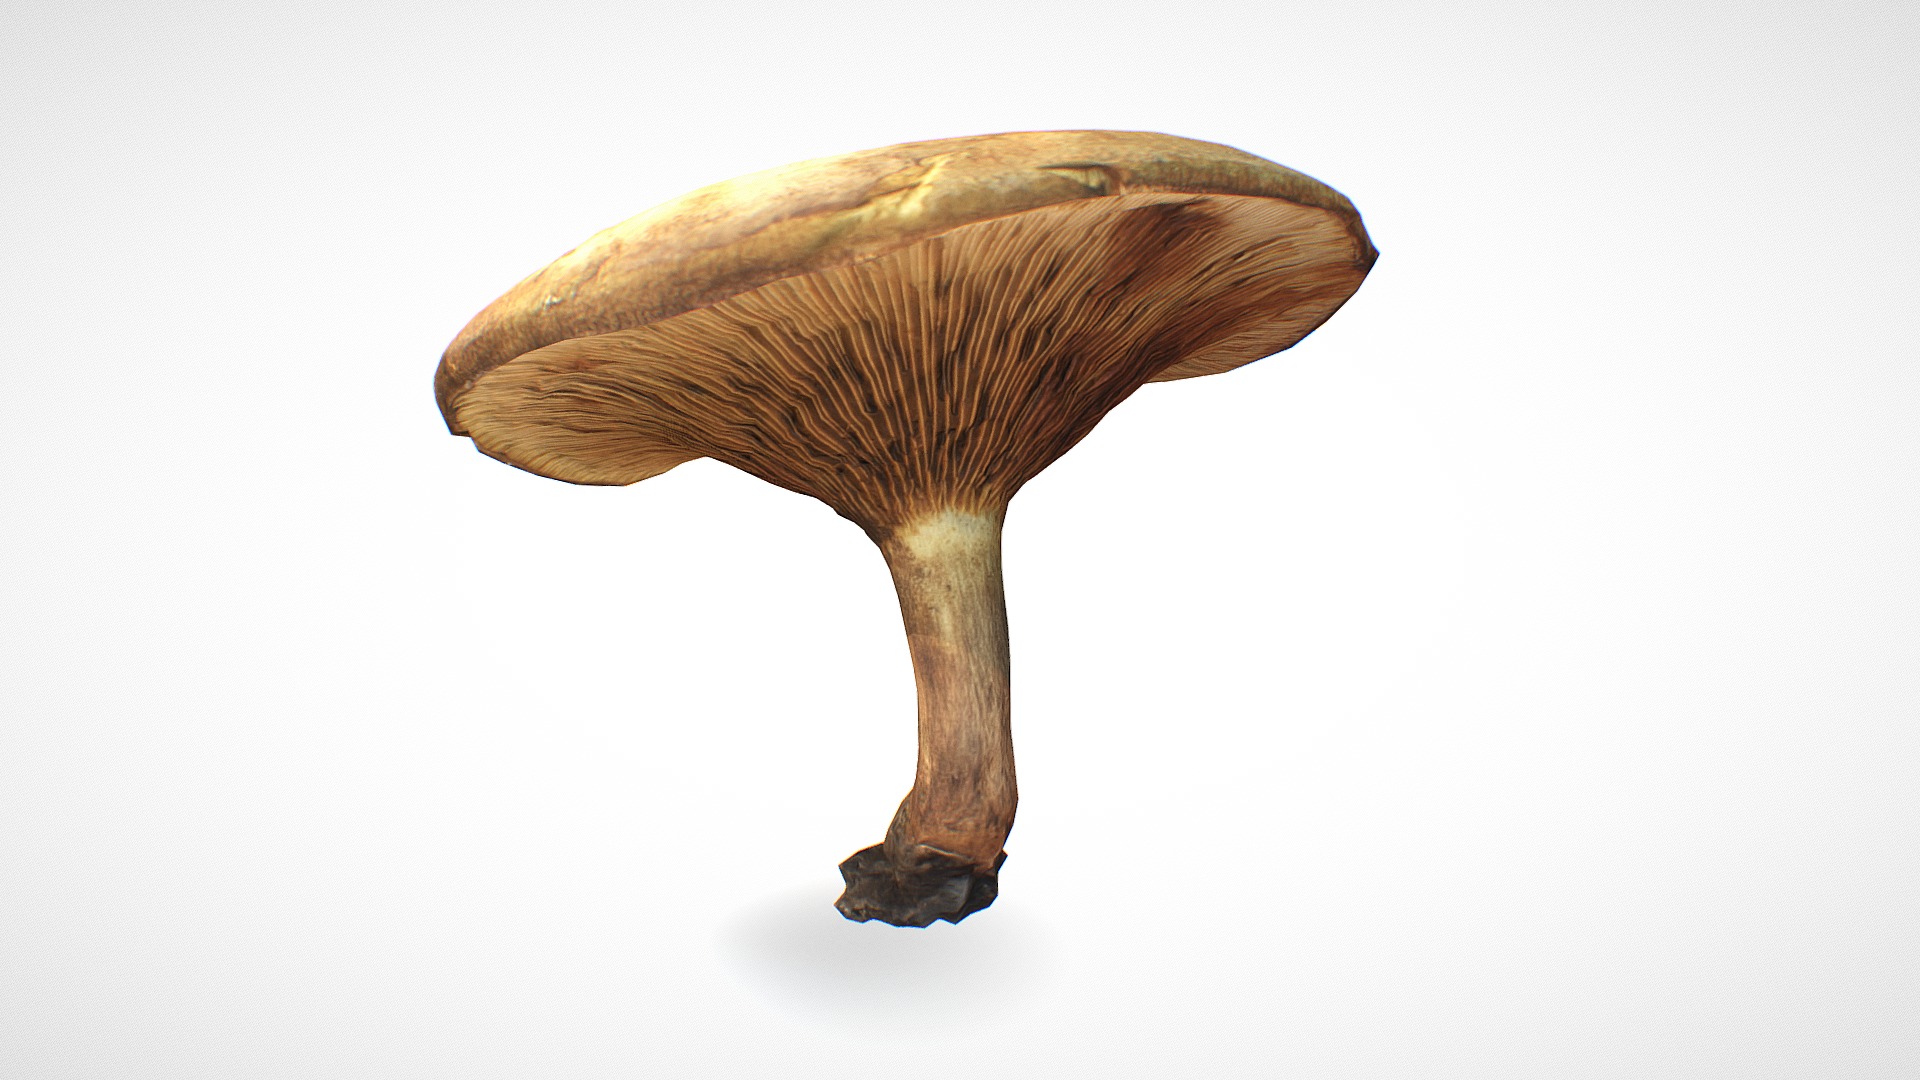 3D model Mushroom 9 – retopo 8K PBR - This is a 3D model of the Mushroom 9 - retopo 8K PBR. The 3D model is about a mushroom with a white background.